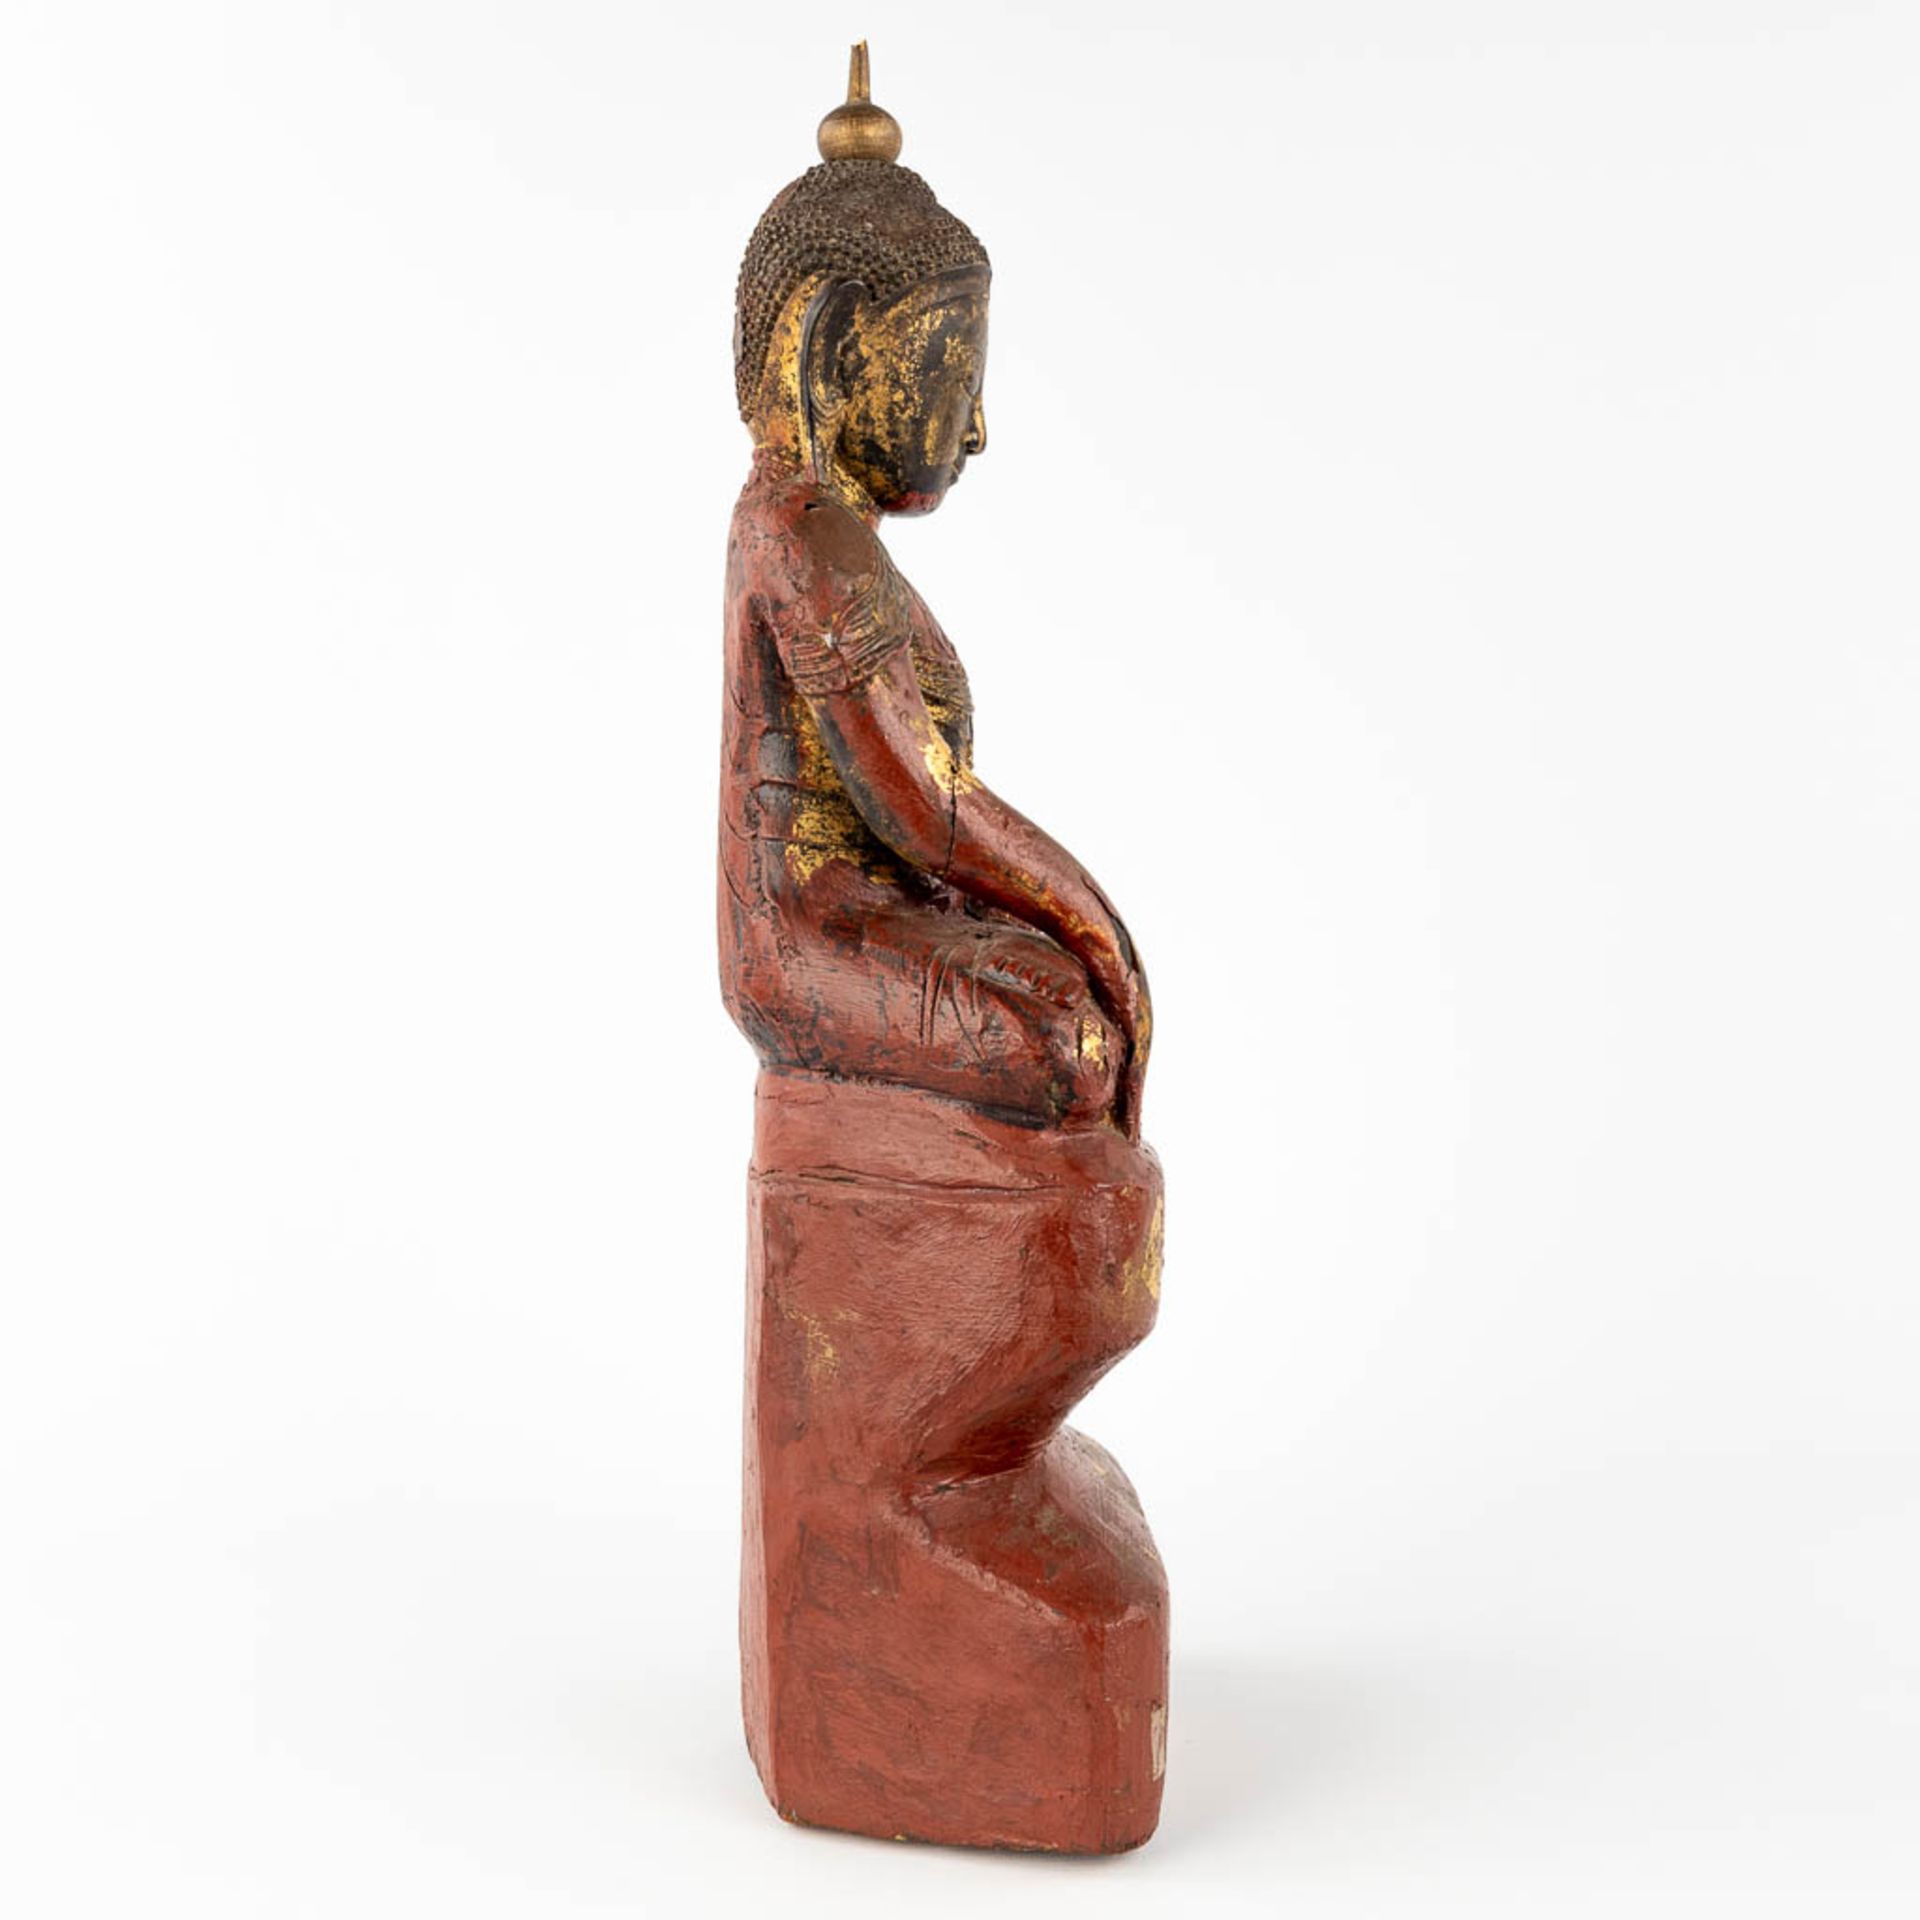 A collection of two wood-sculptured buddha statues, 19th/20th C. (W: 29 x H: 60 cm) - Image 16 of 27